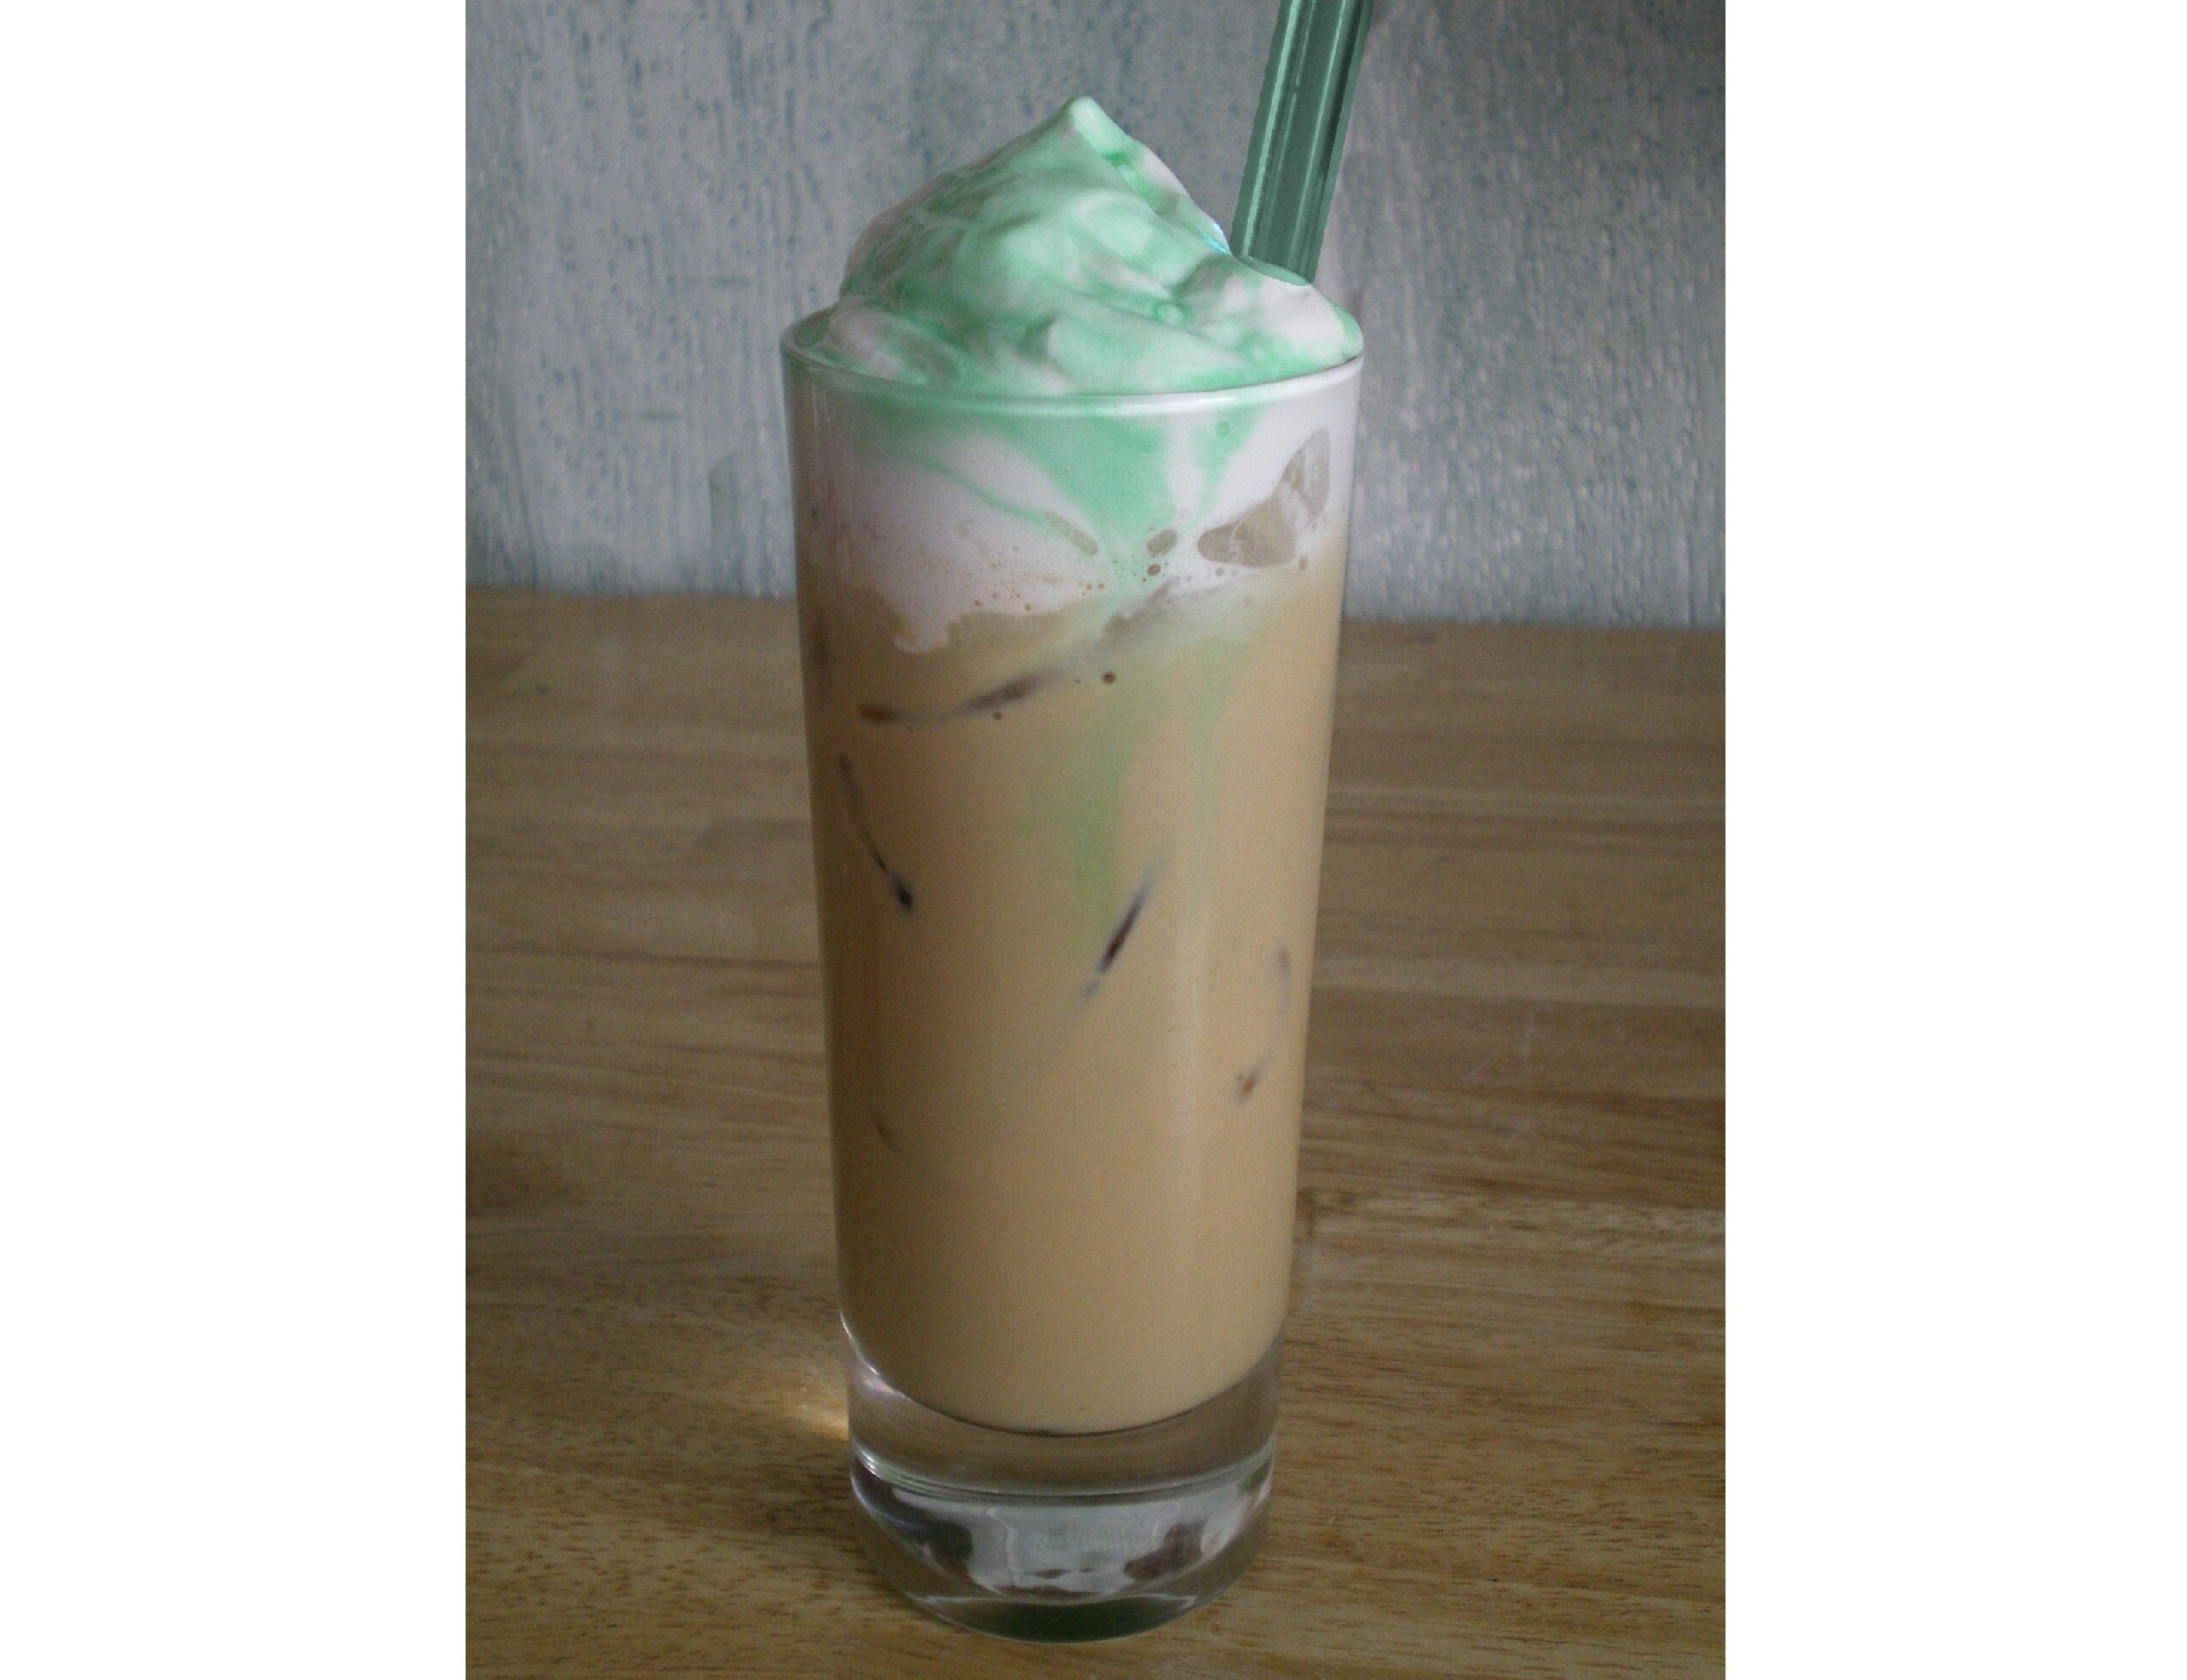  A perfect blend of coffee, whisky, and cream for a refreshing twist!